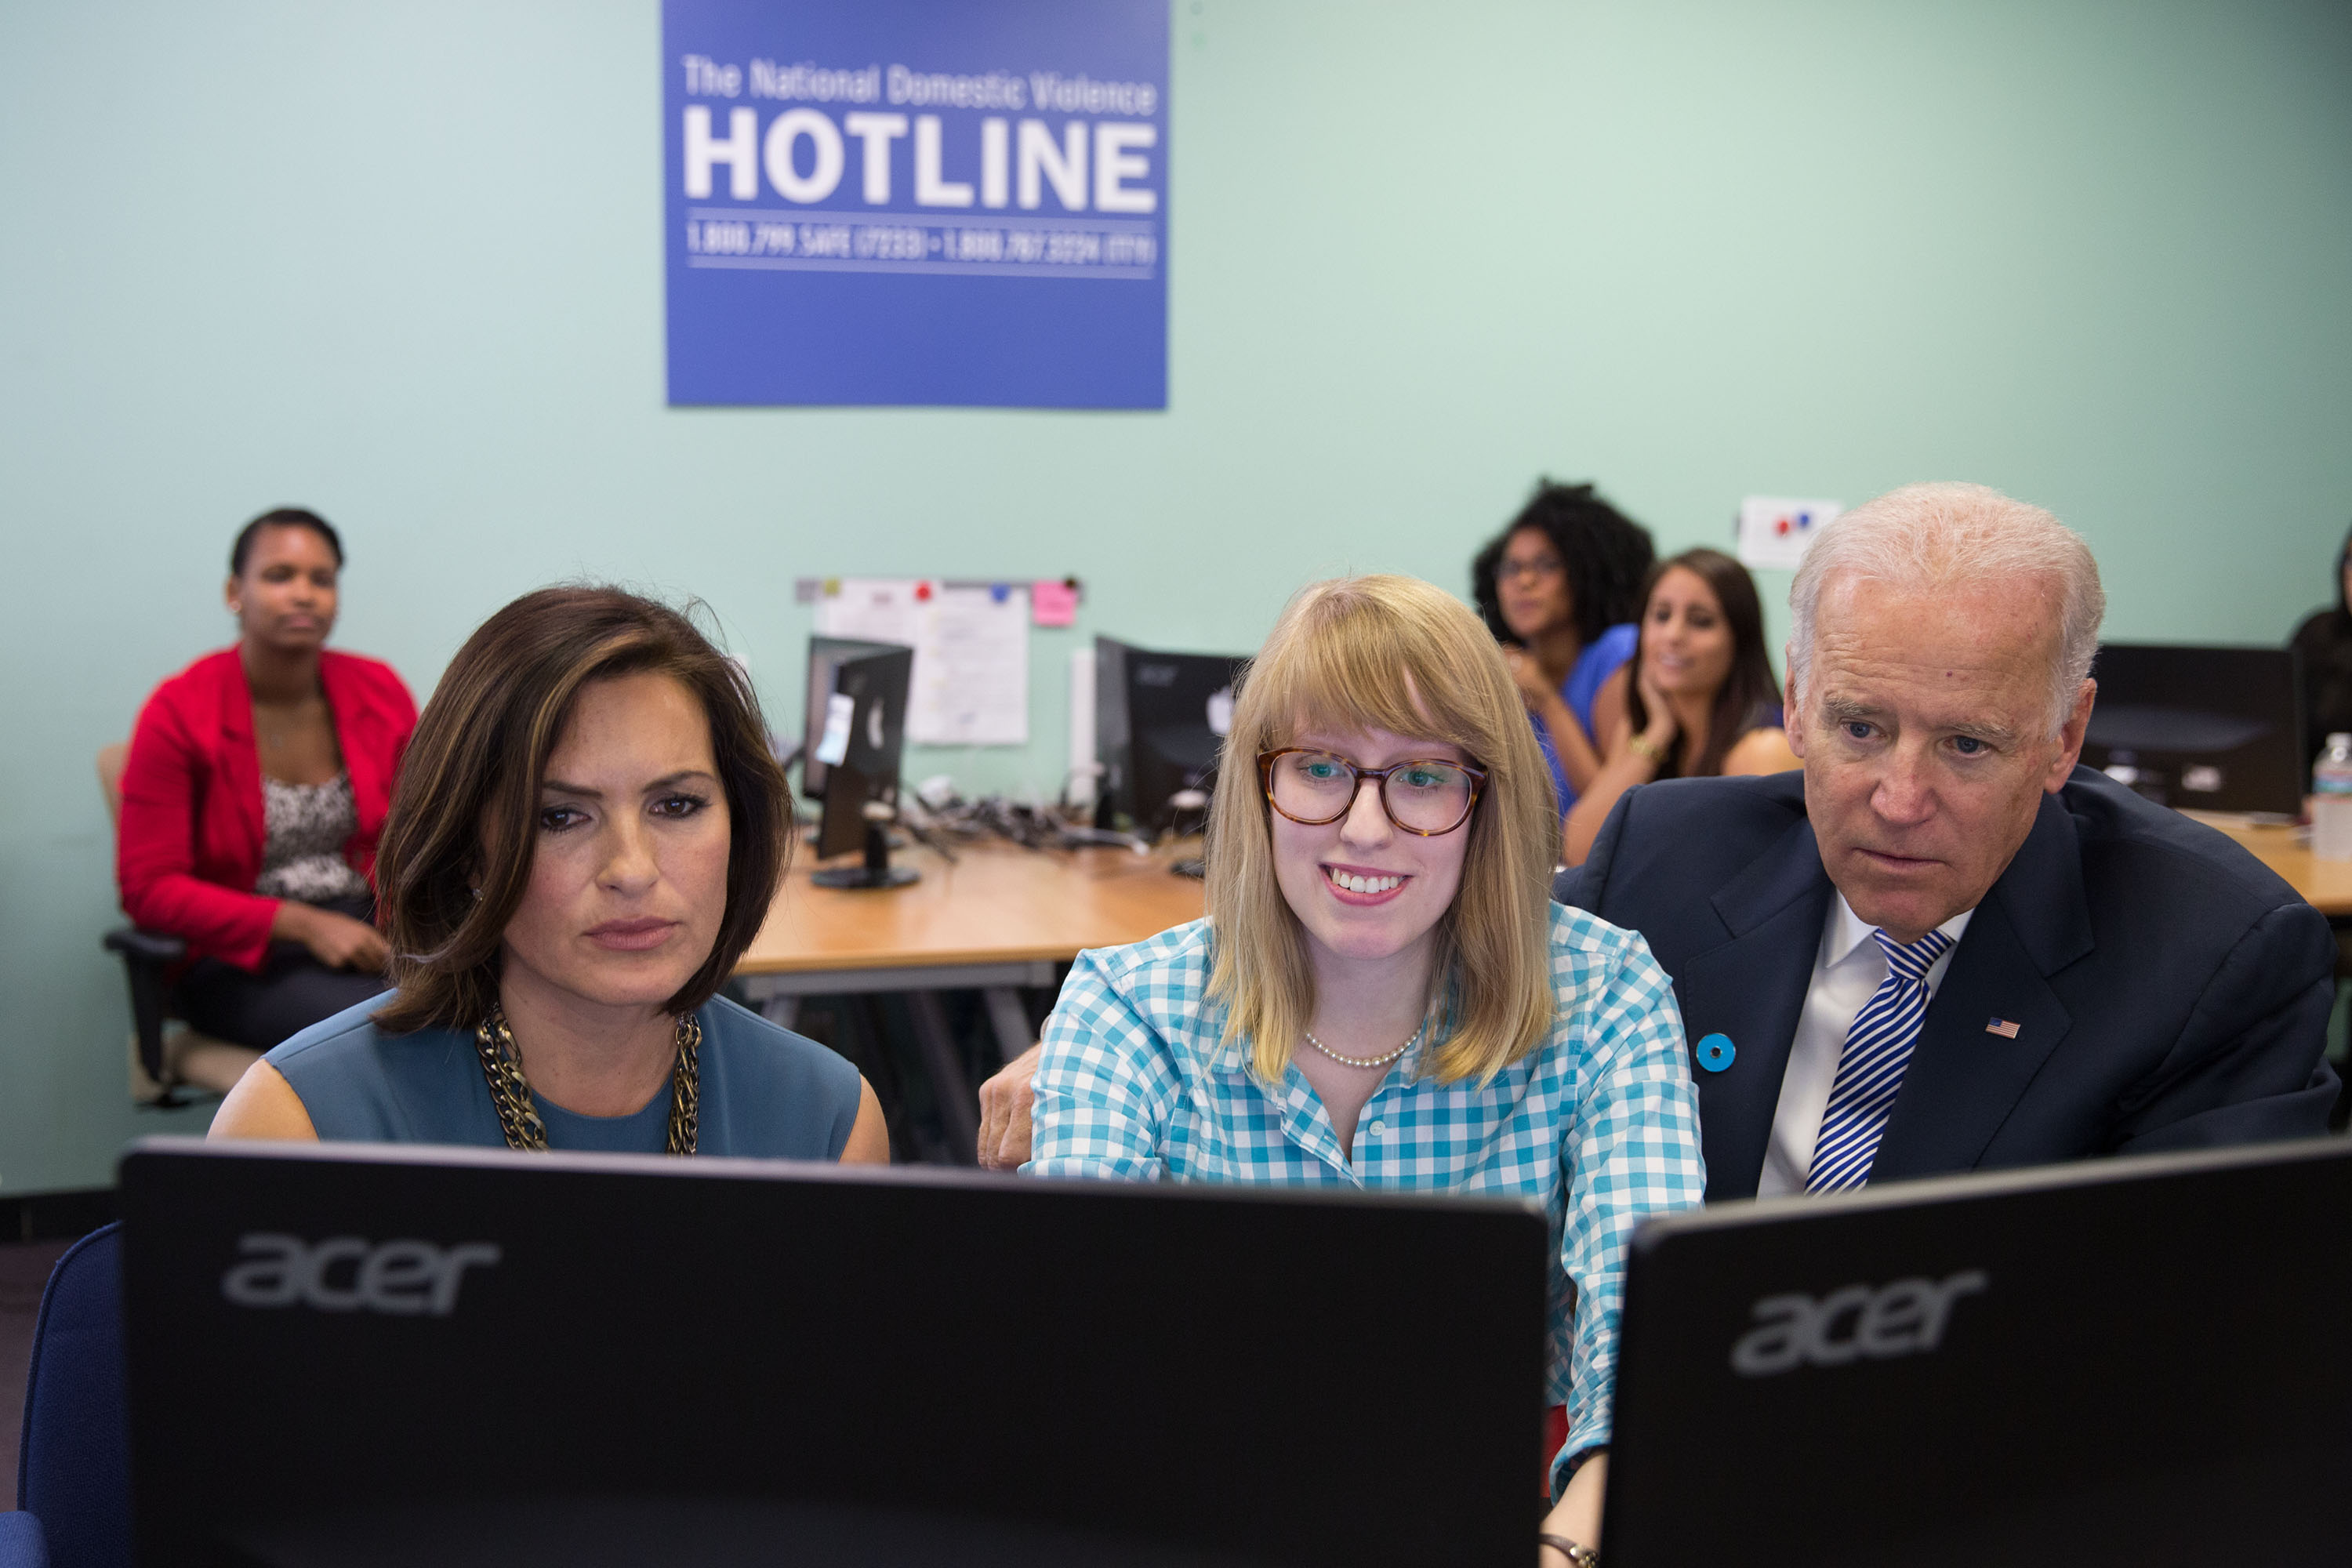 A Hotline advocate shows Vice President Biden and Mariska how the new chat service works.